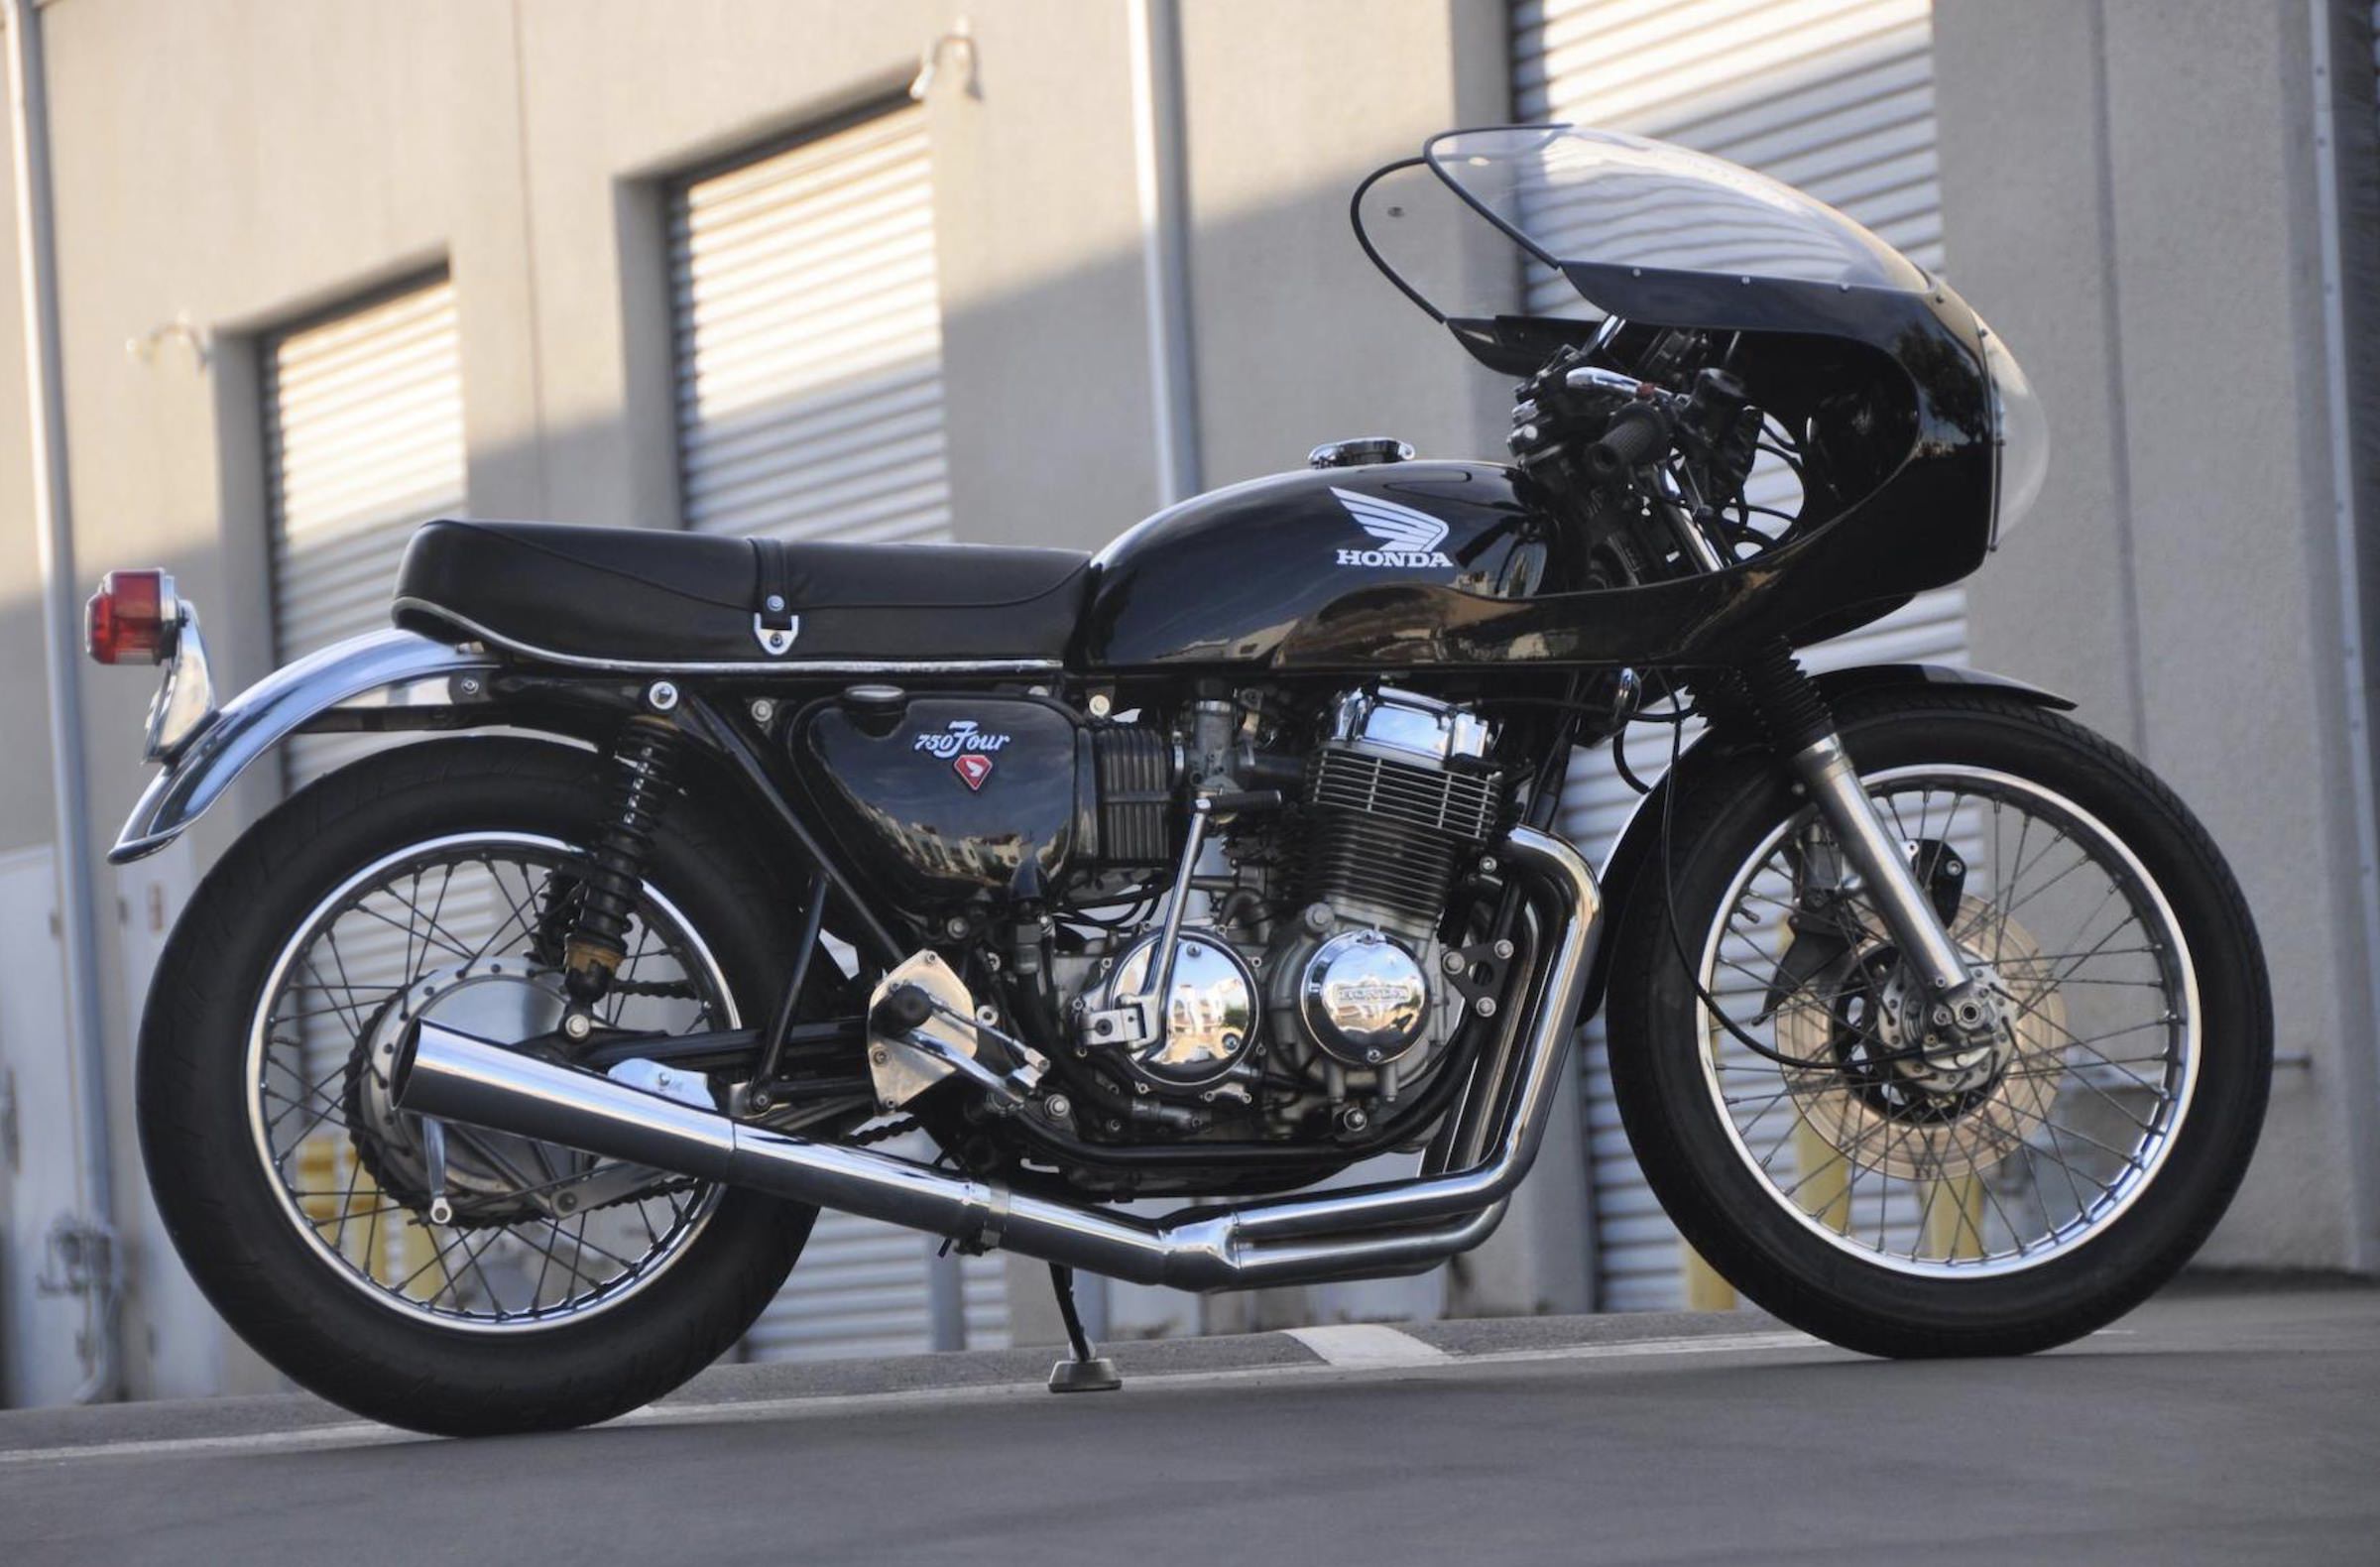 Is This The Perfect Honda Cb750 Cafe Racer? We Think It Might Be.